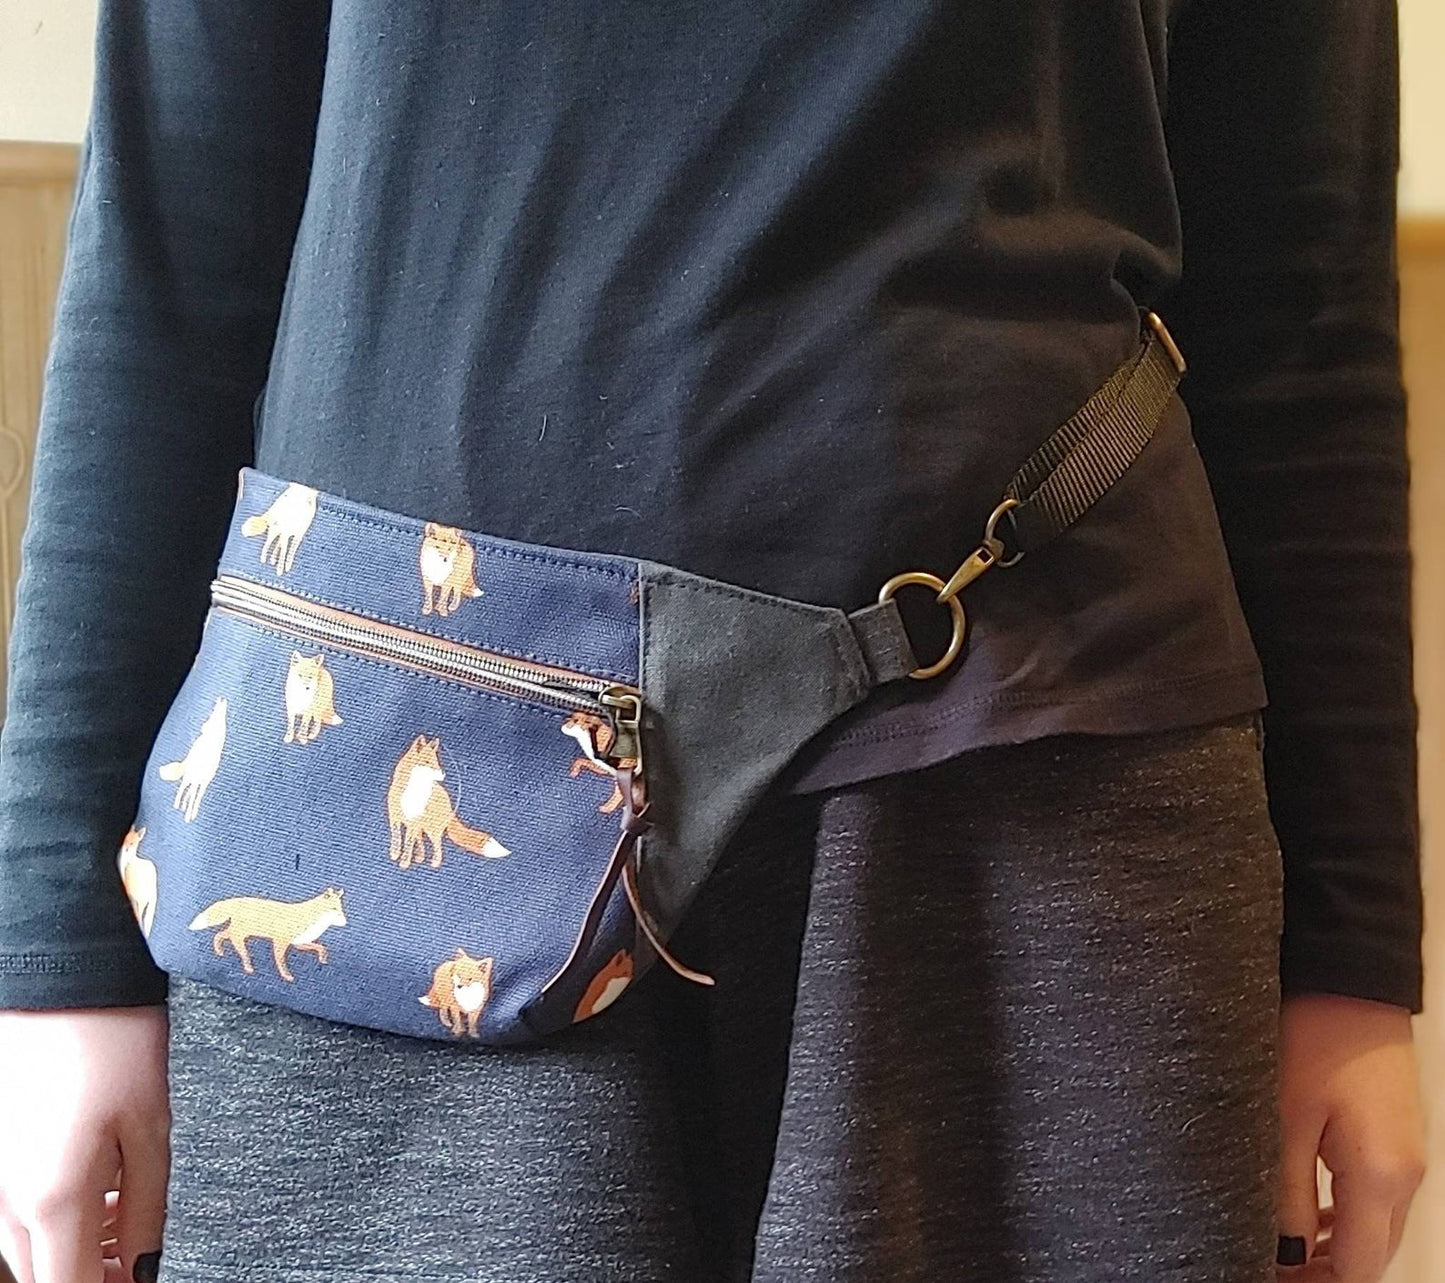 Belt Bag / Hip Pack Large Capacity in Waxed Canvas and Rabbit Print